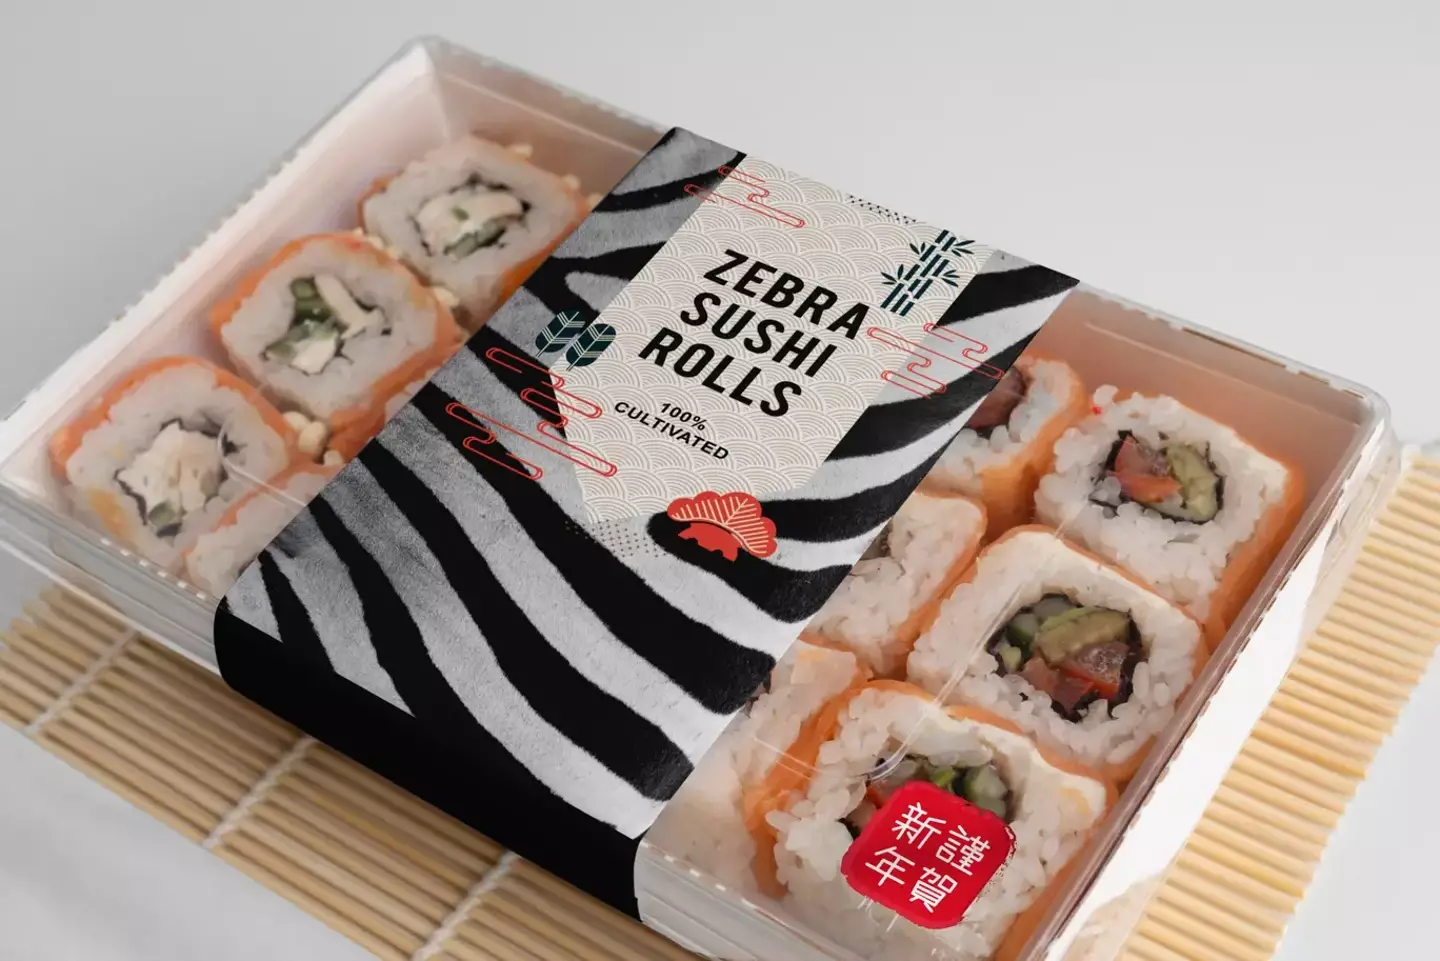 Nothing to see here, just some zebra sushi.